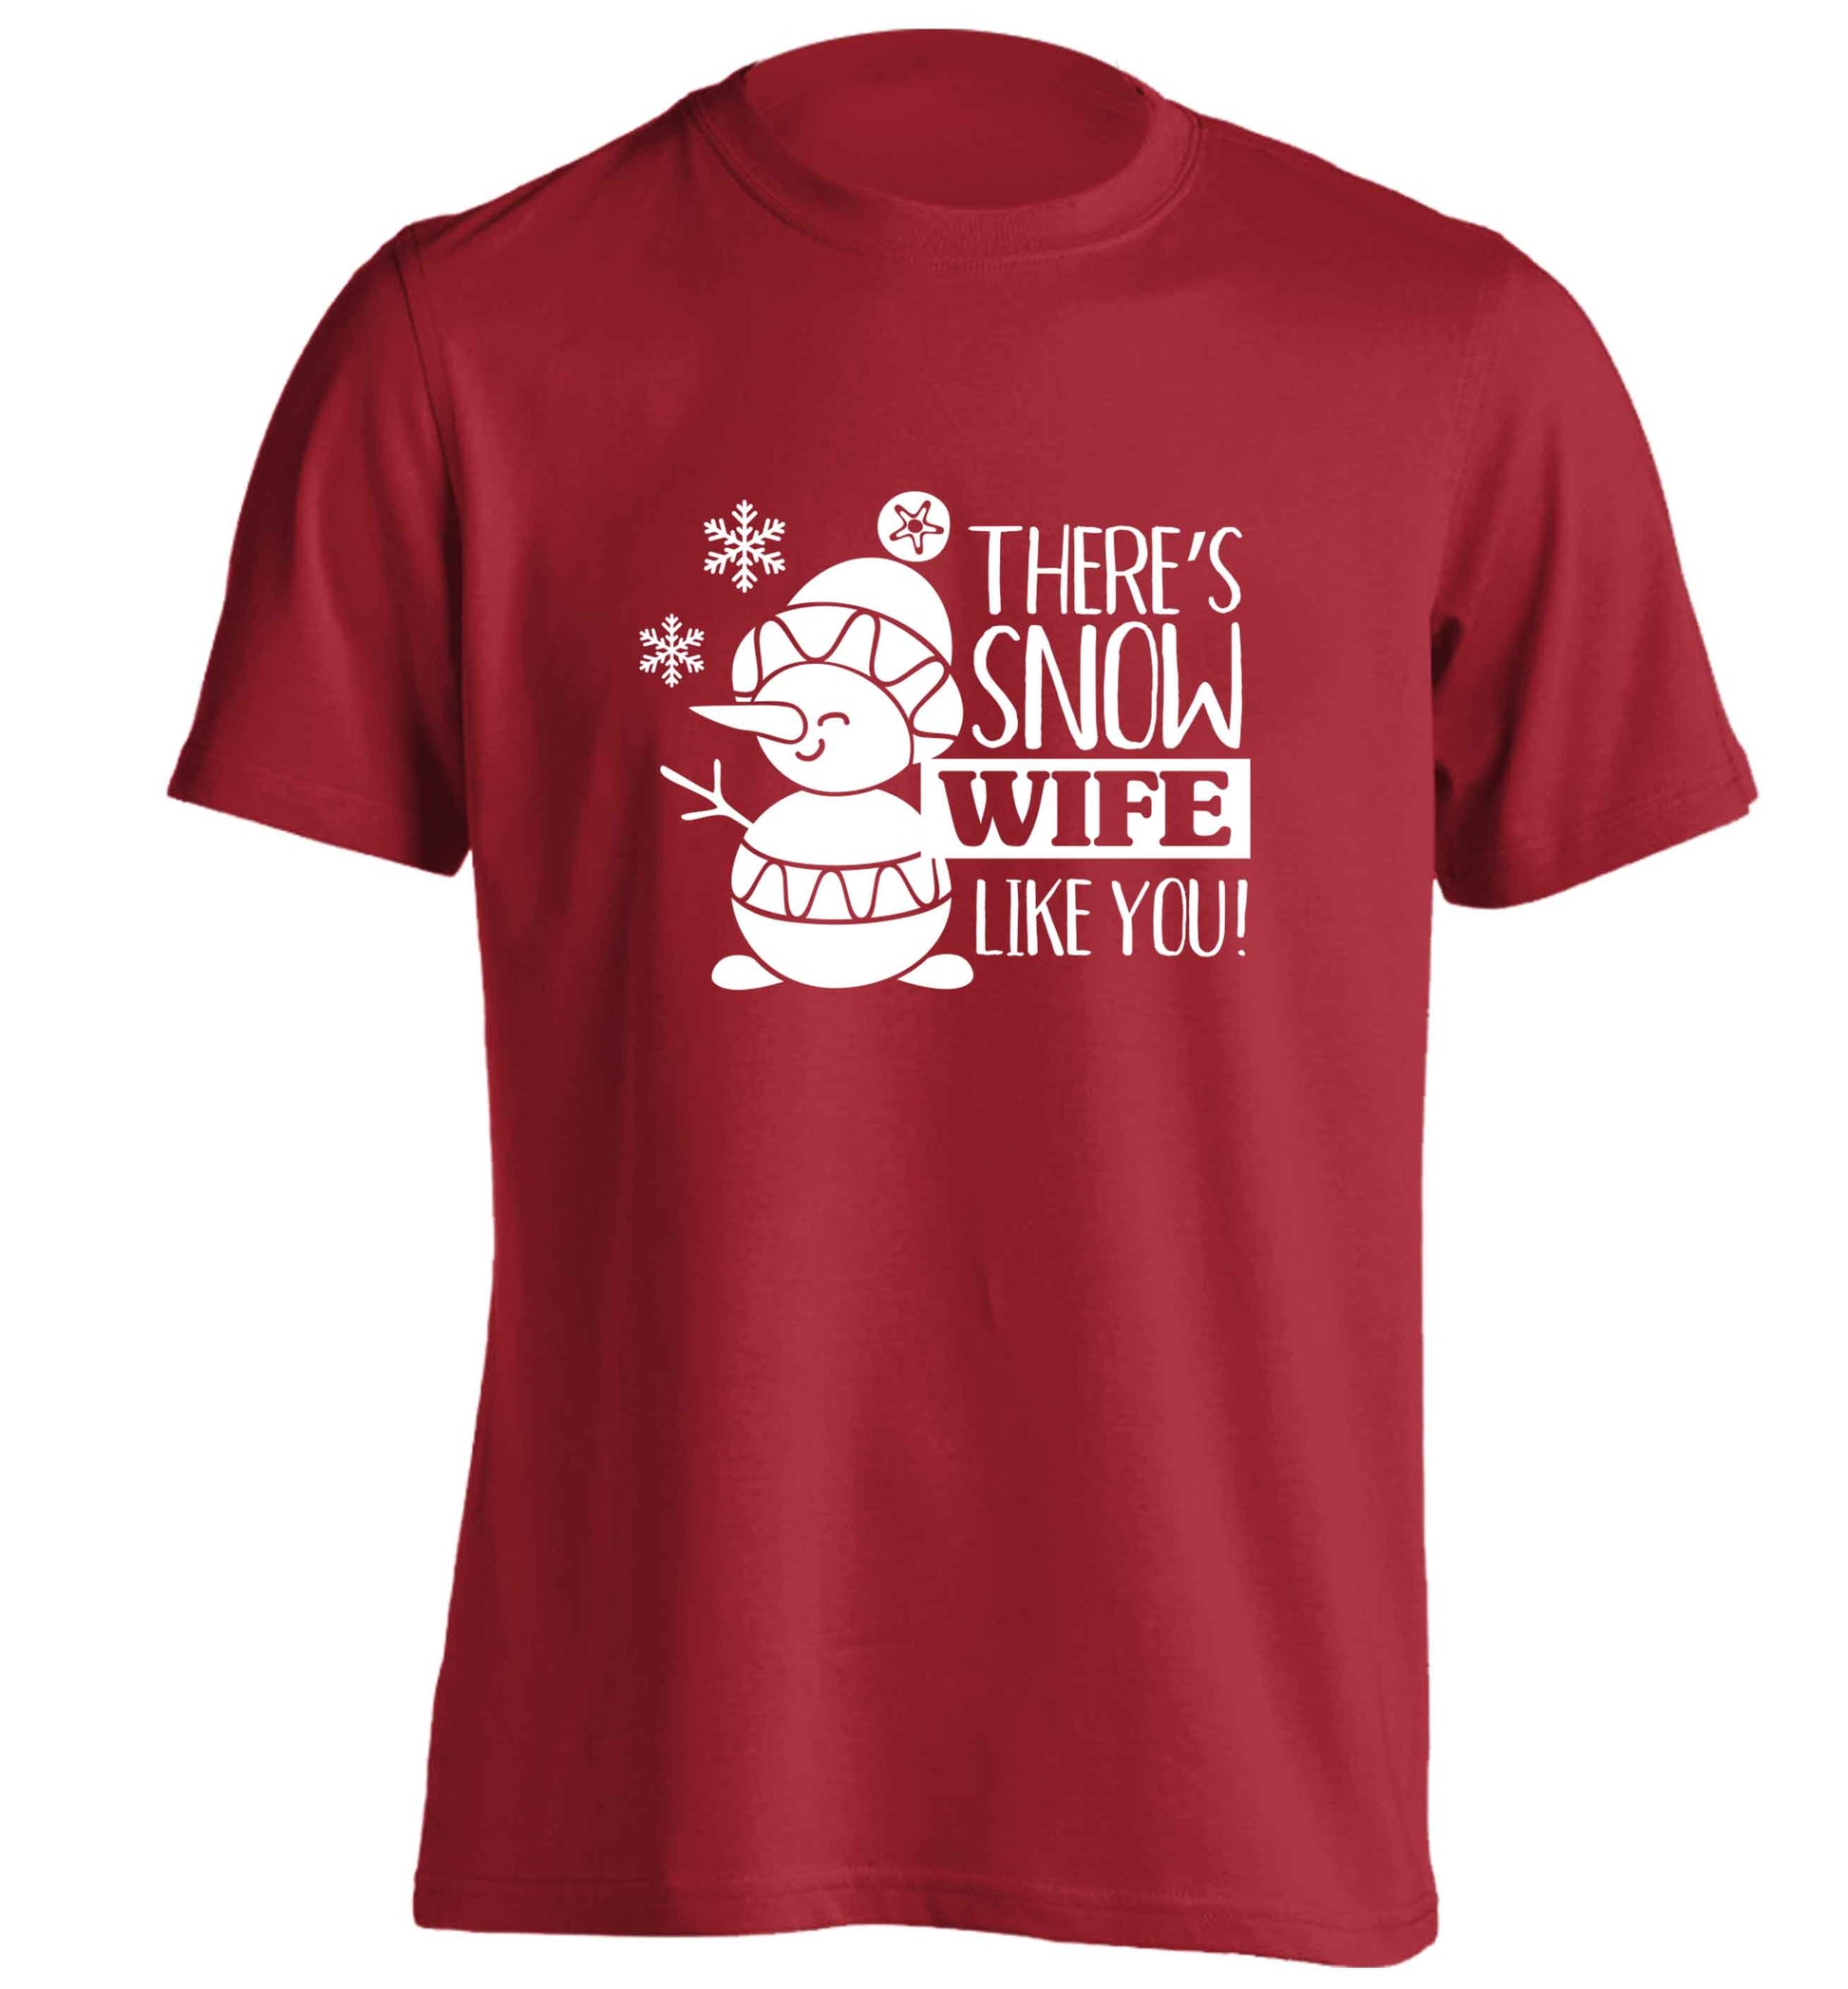 There's snow wife like you adults unisex red Tshirt 2XL